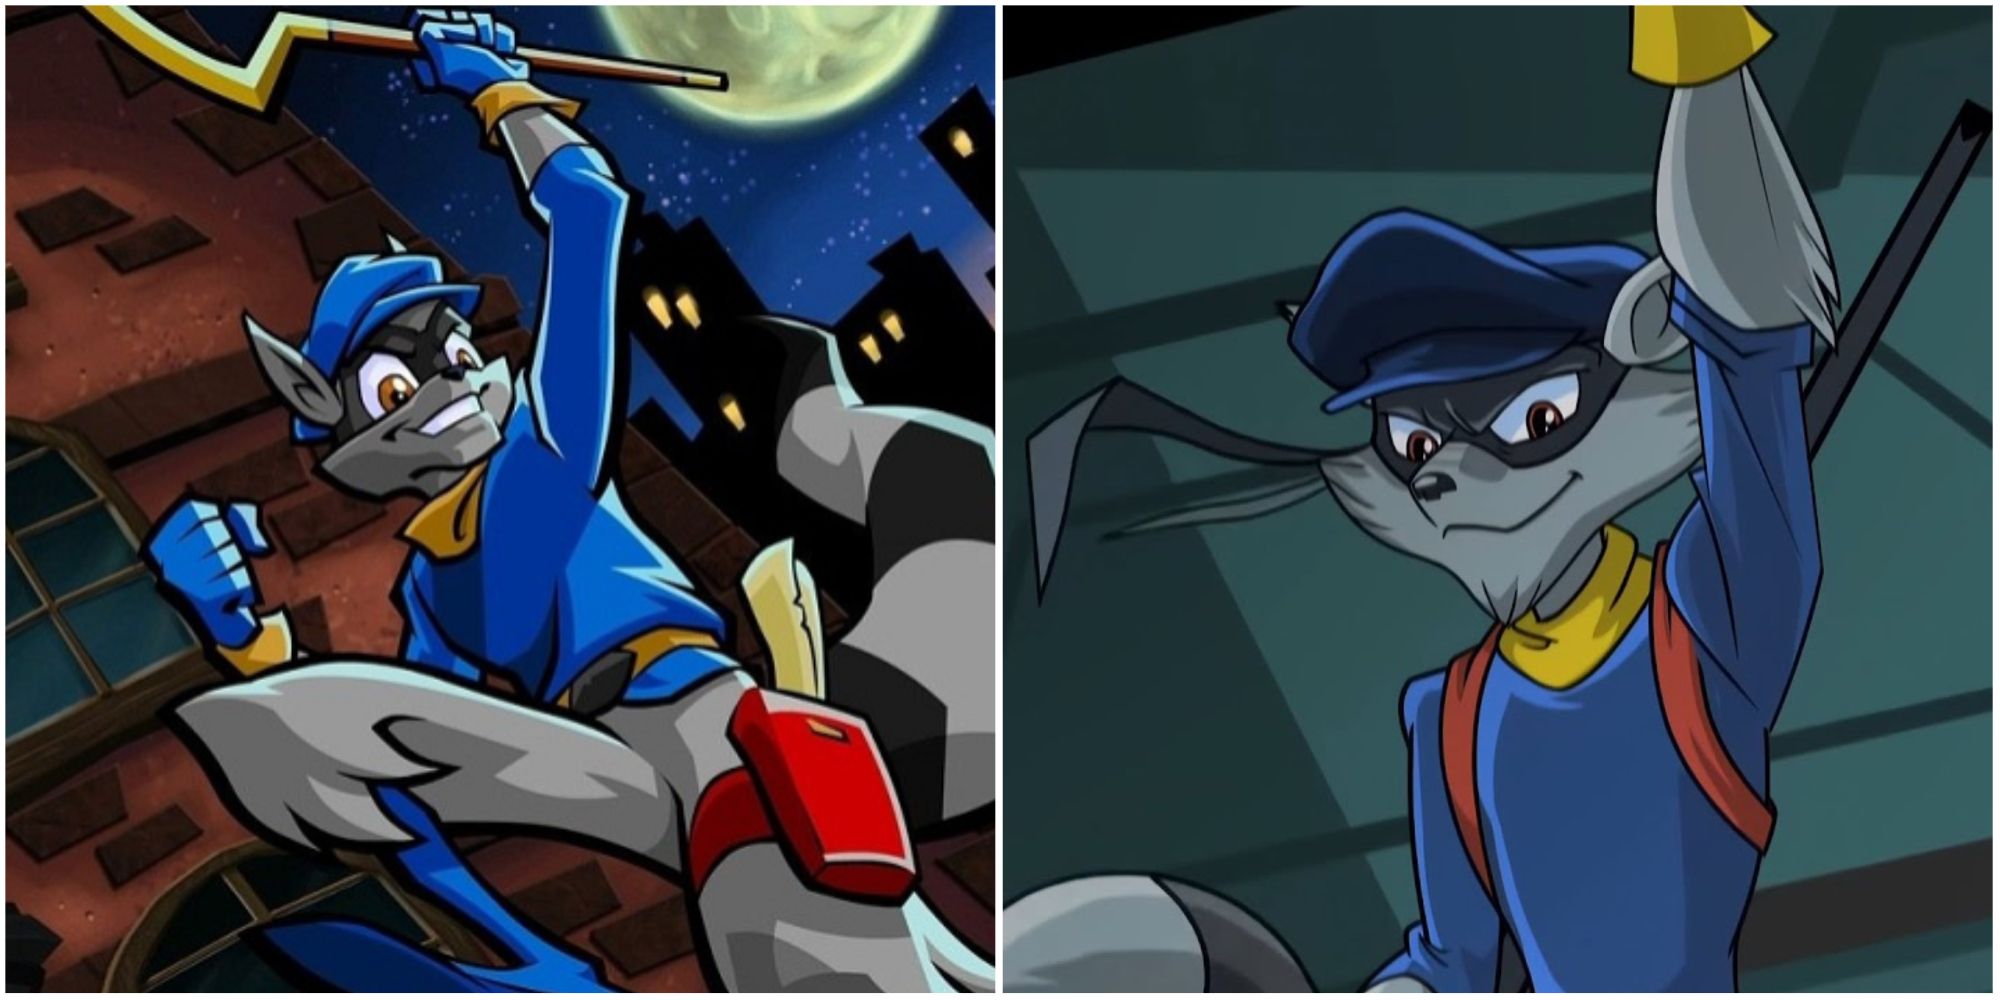 Sly 2: Band of Thieves and Sly Cooper: Thieves in Time